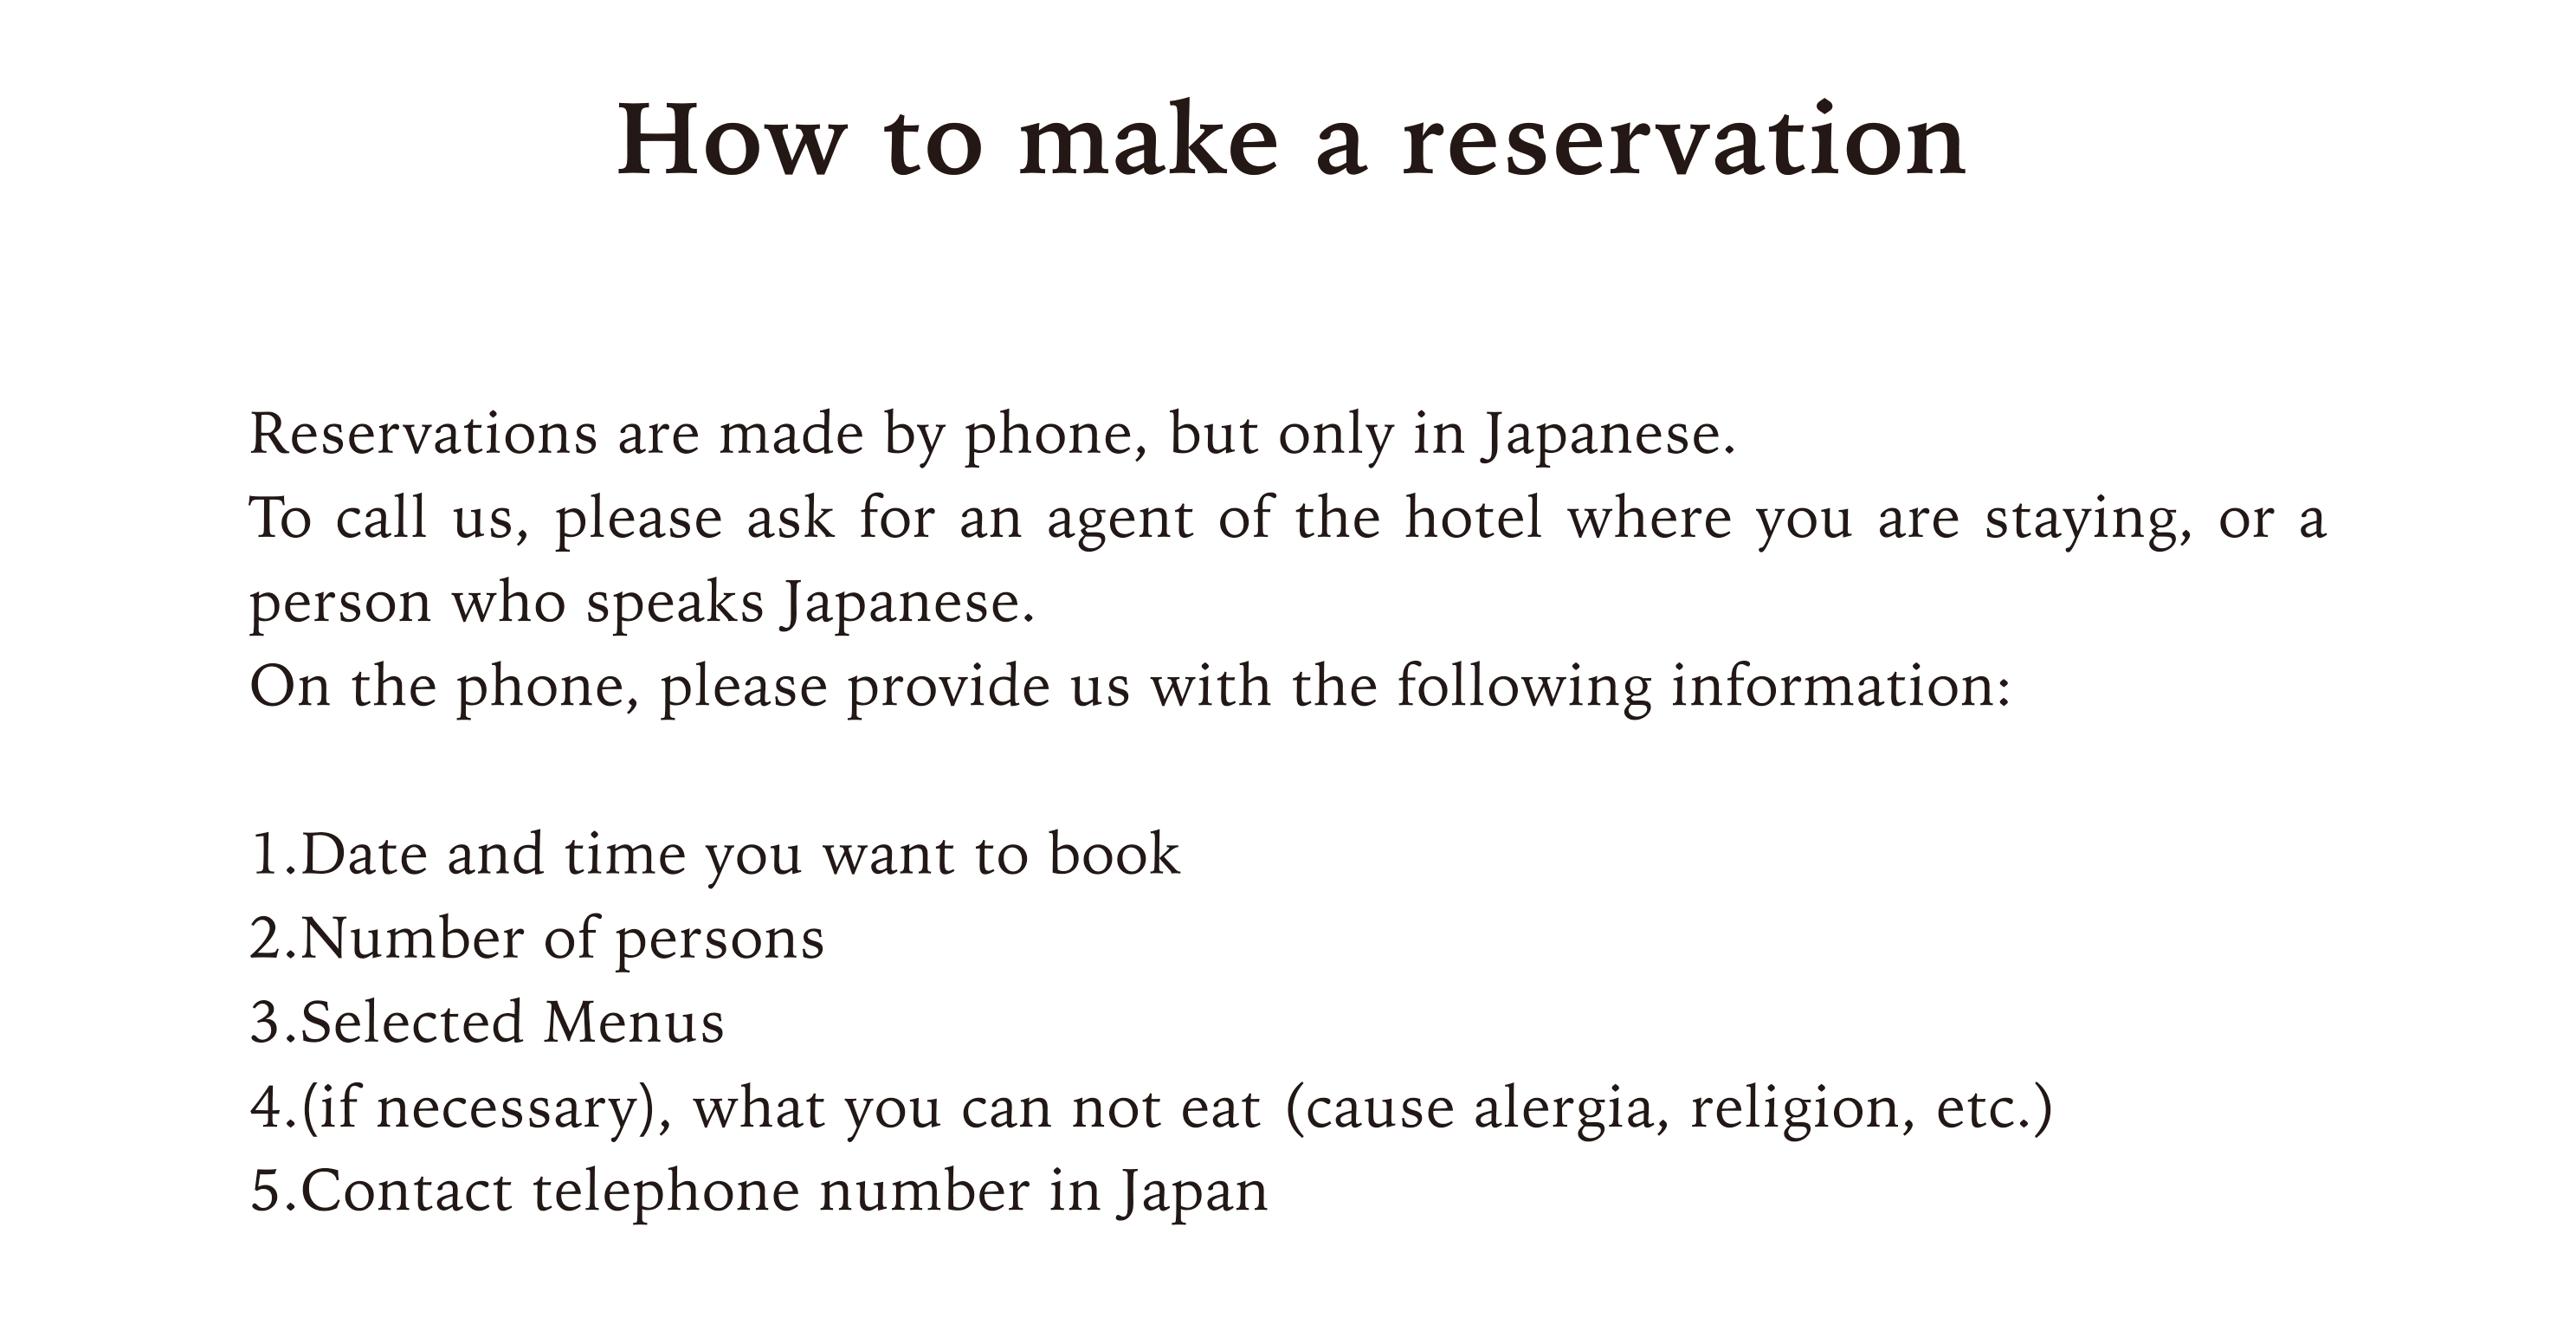 How to make a reservation